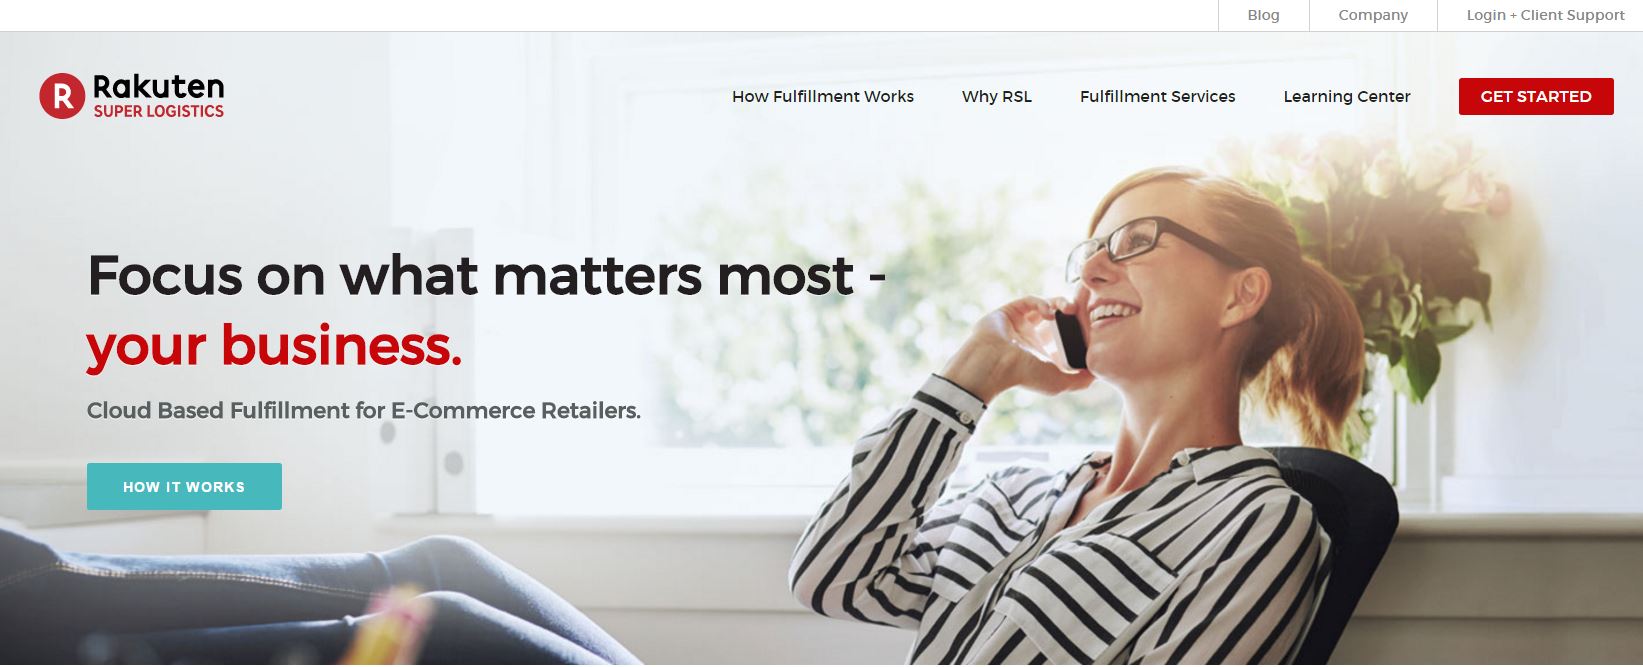 New RSL Websites Helps eCommerce Retailers Outsource Their Fulfillment